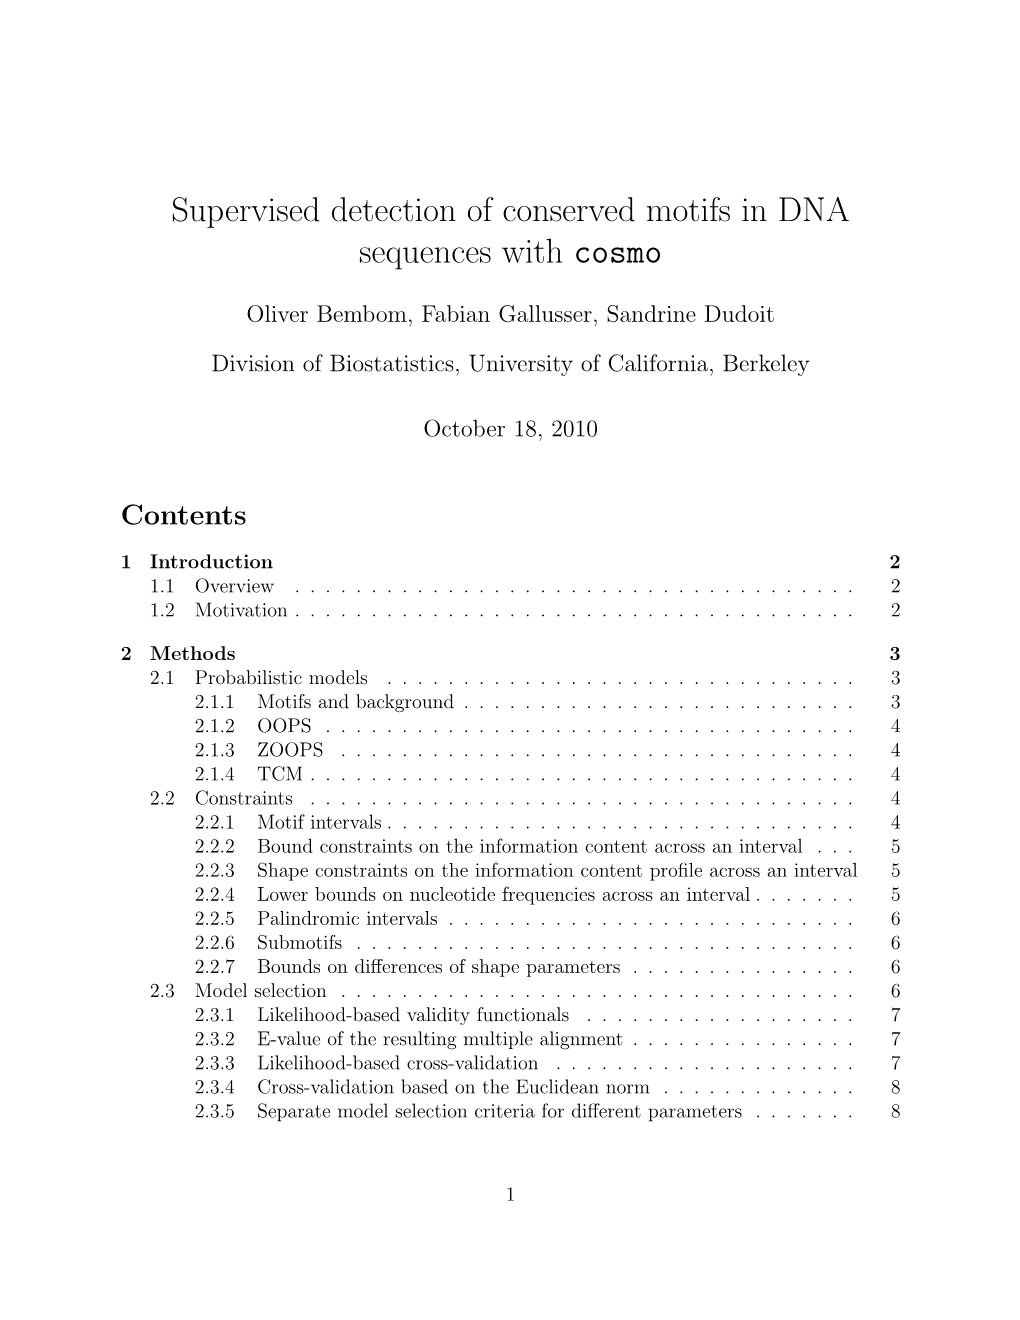 Supervised Detection of Conserved Motifs in DNA Sequences with Cosmo